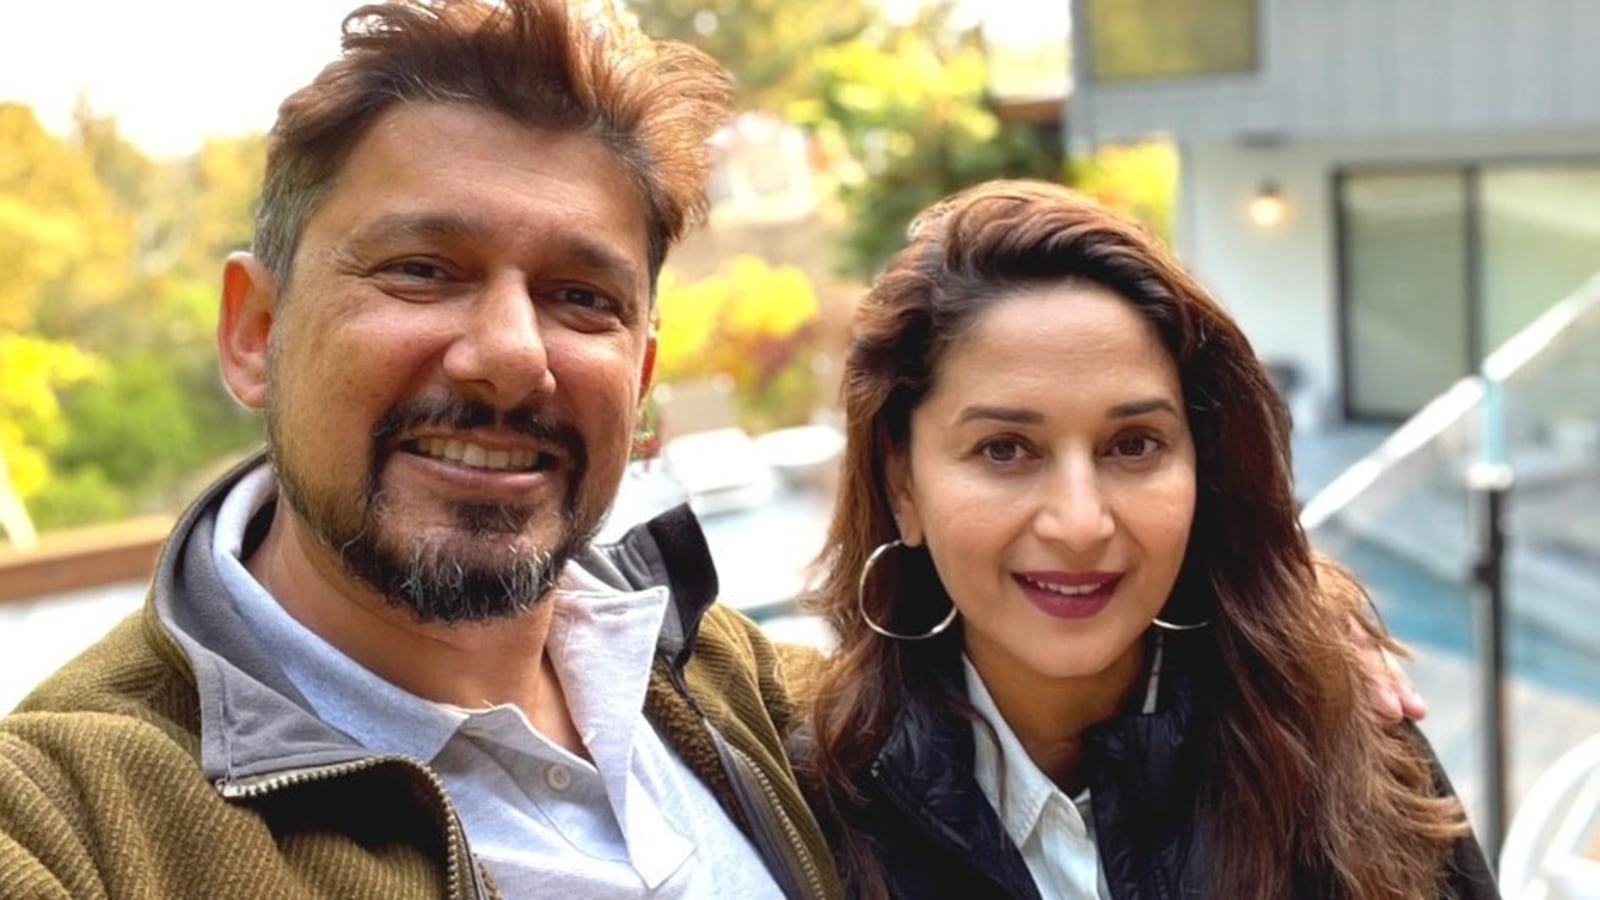 Madhuri Dixit And Her Husband Shriram Nene Flash Wide Smiles In New Photo Fans Call It ‘beauty